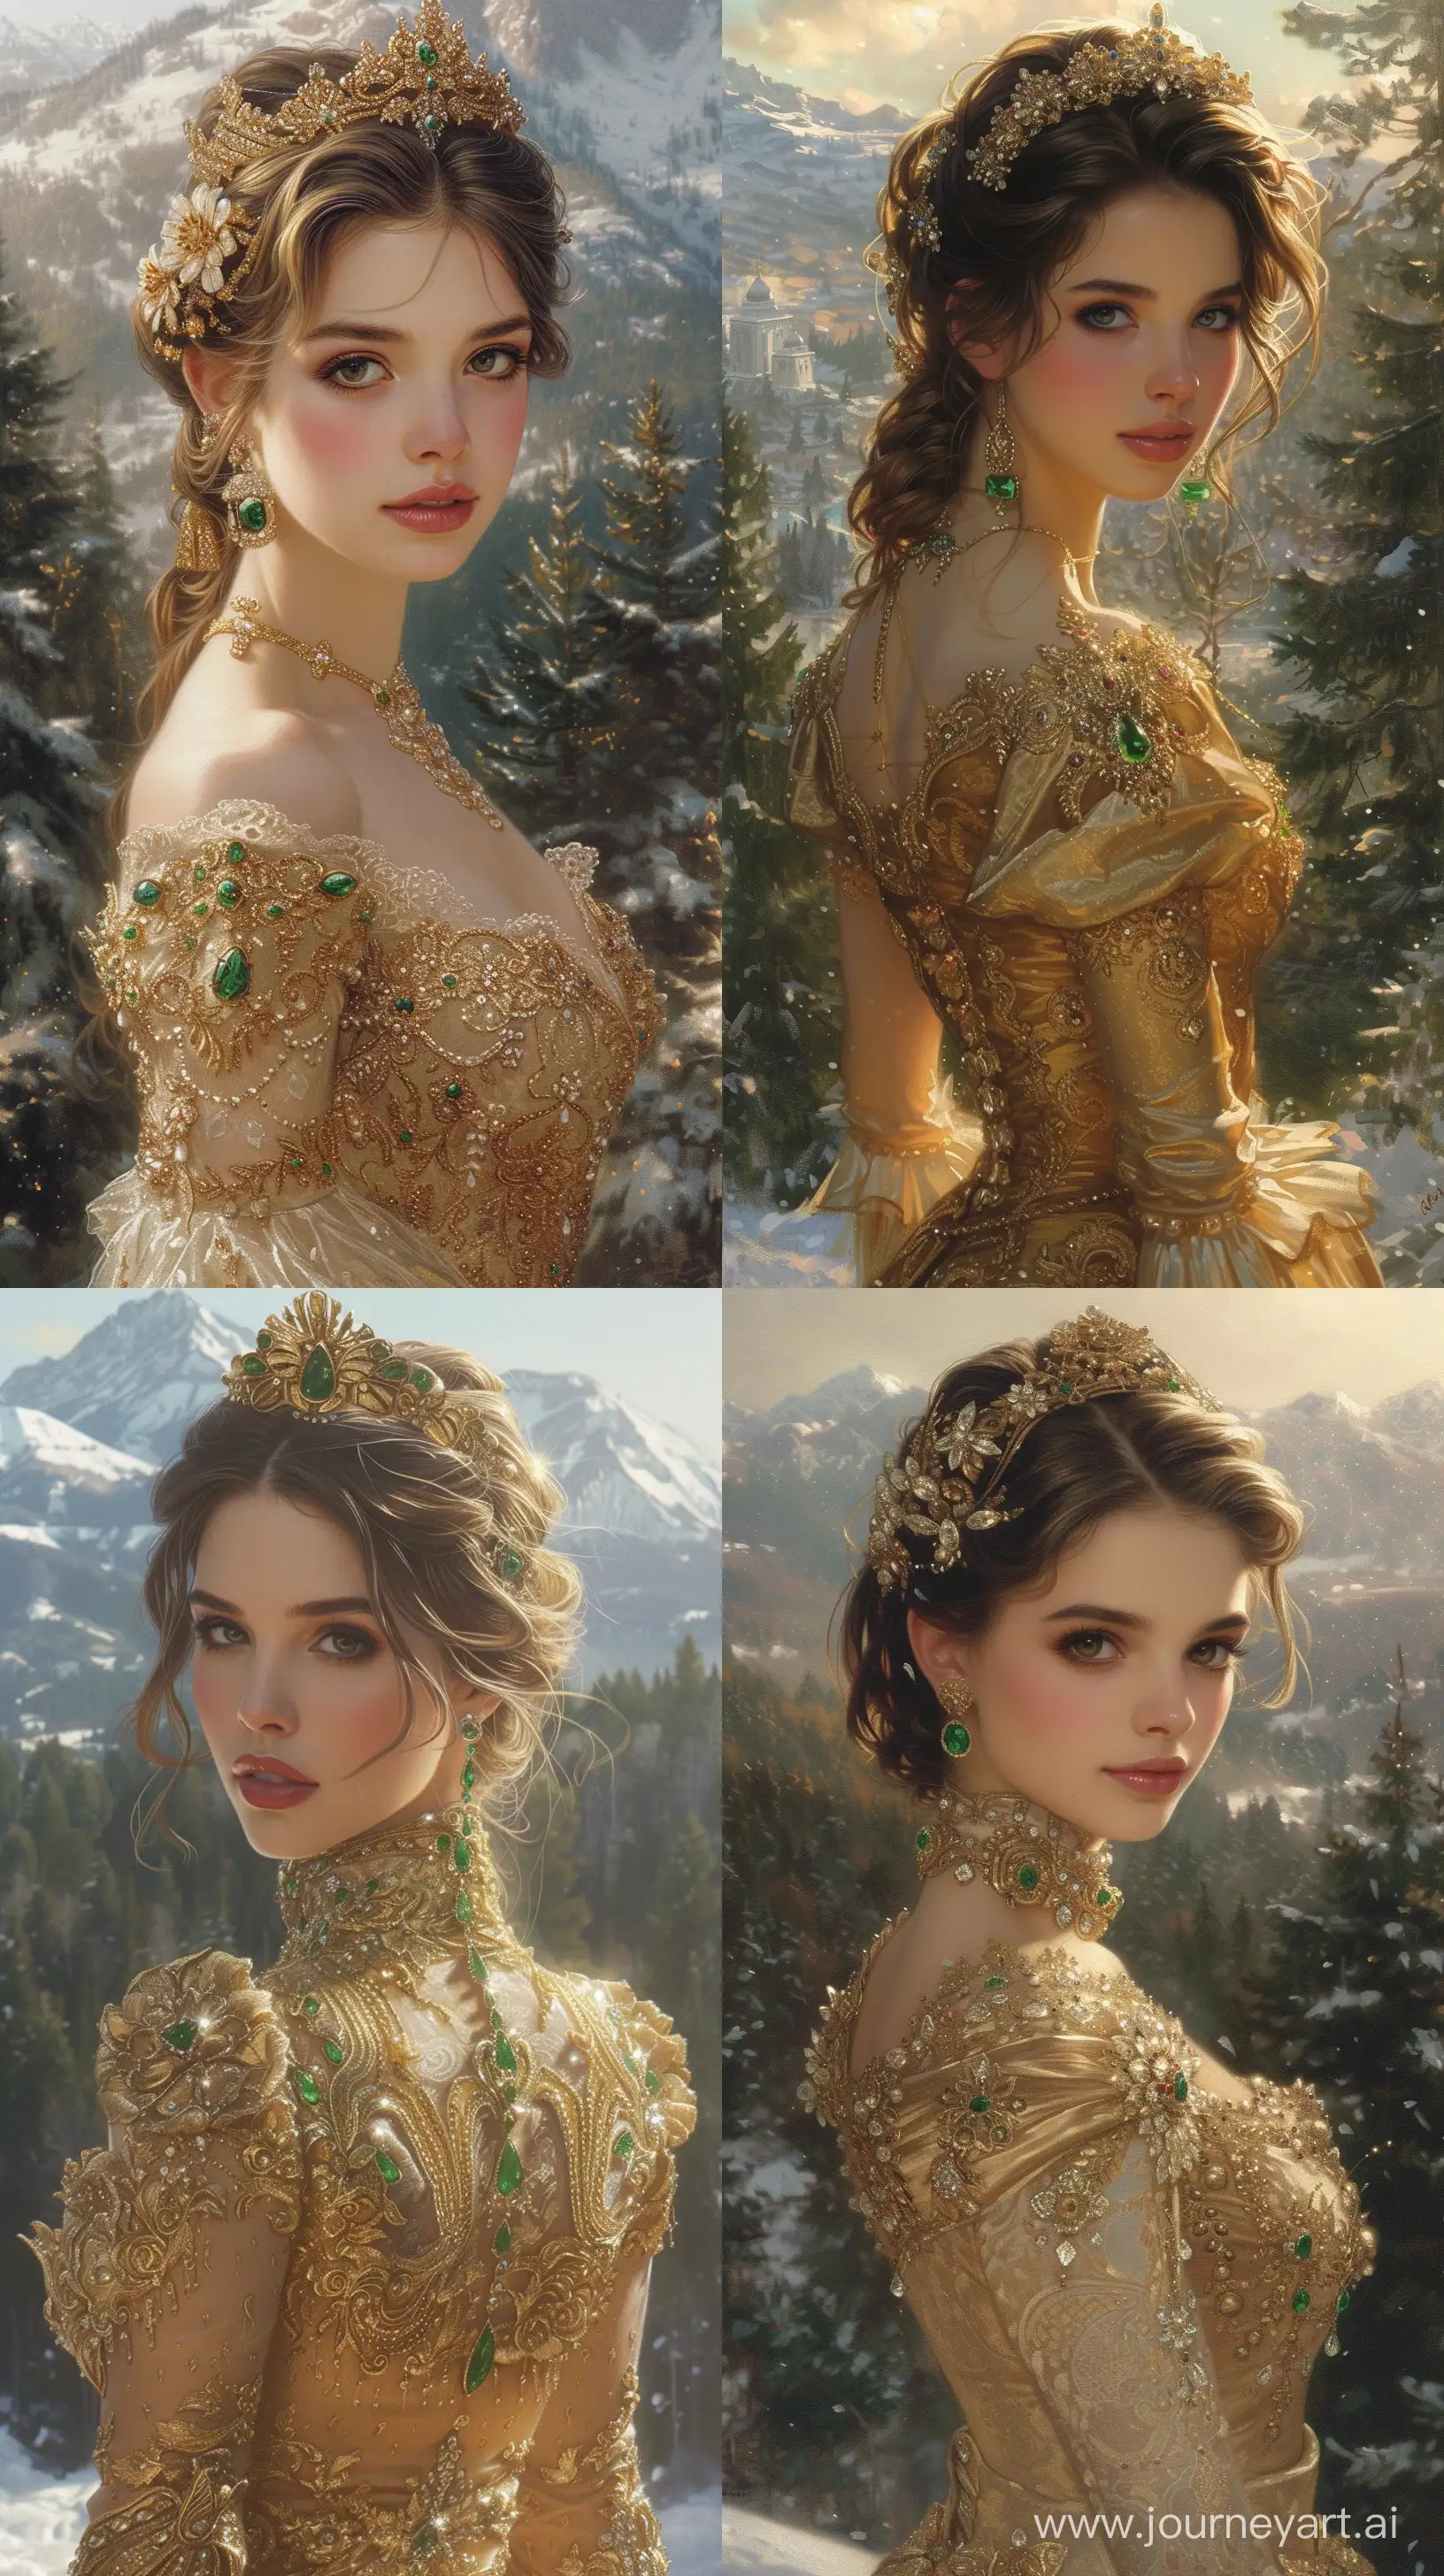 Exquisite-Woman-in-Radiant-Gold-Dress-Gazing-at-Enchanting-Kingdom